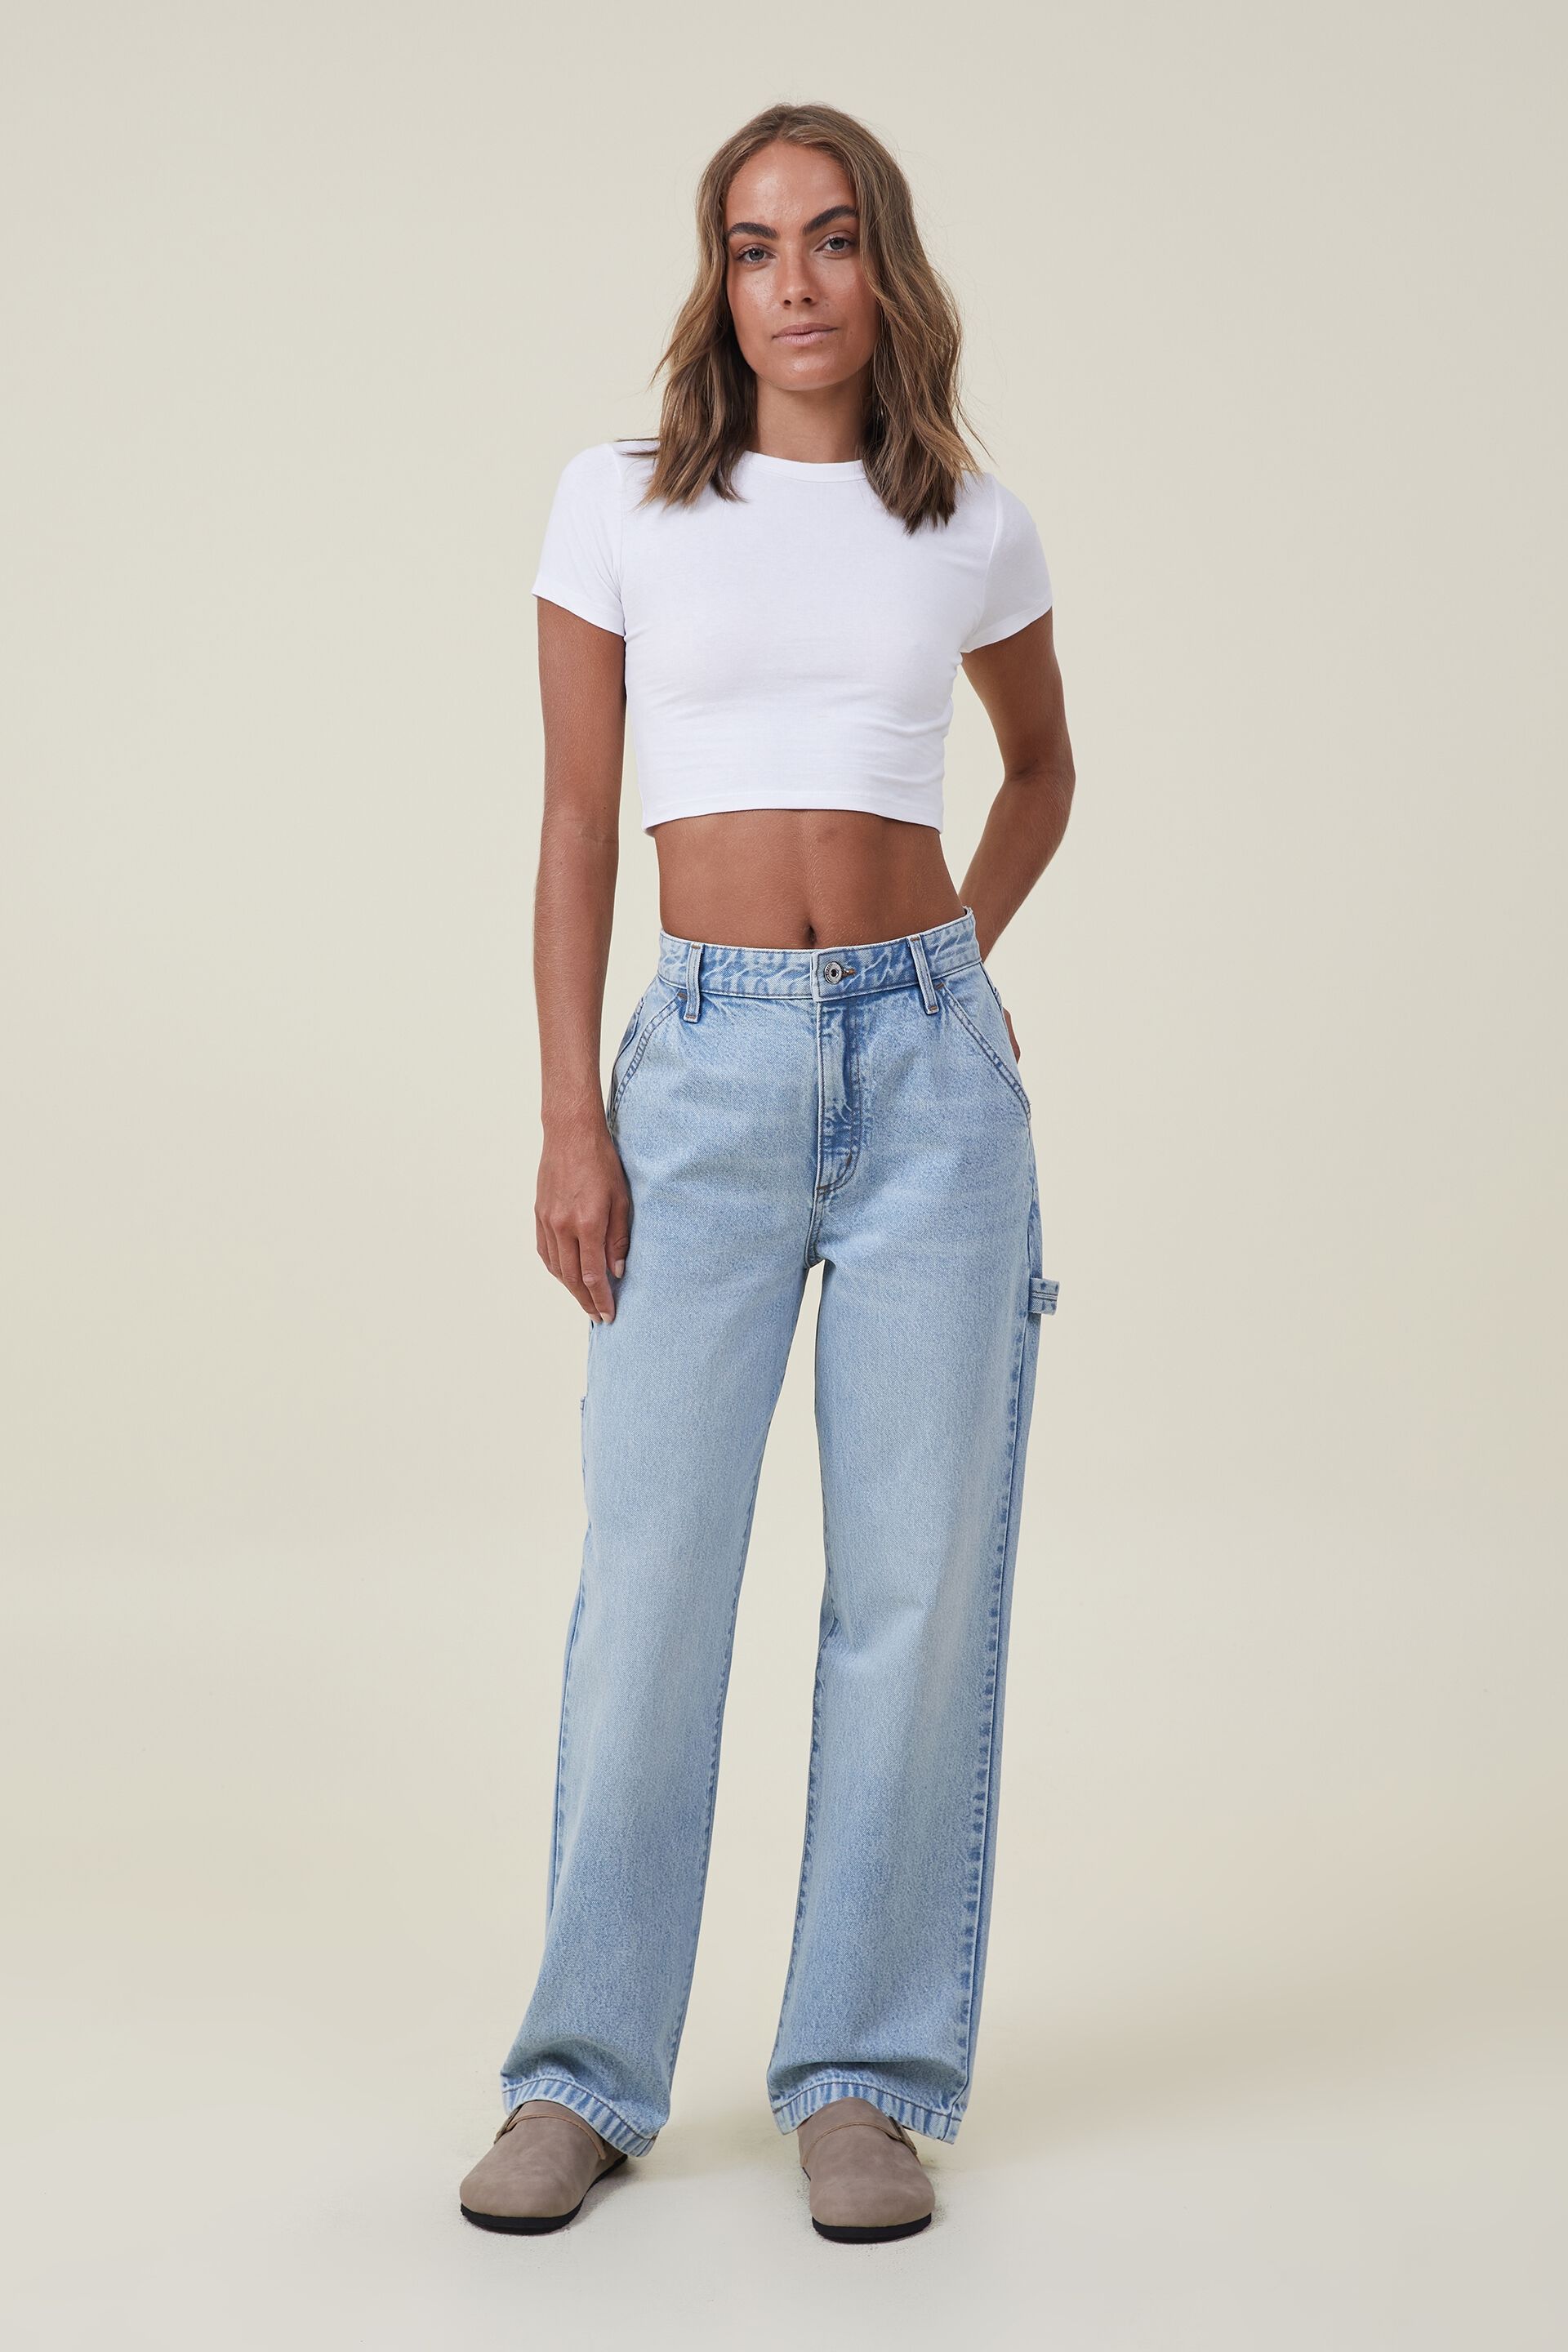 Buy Being Human White Straight Fit Women Jeans online